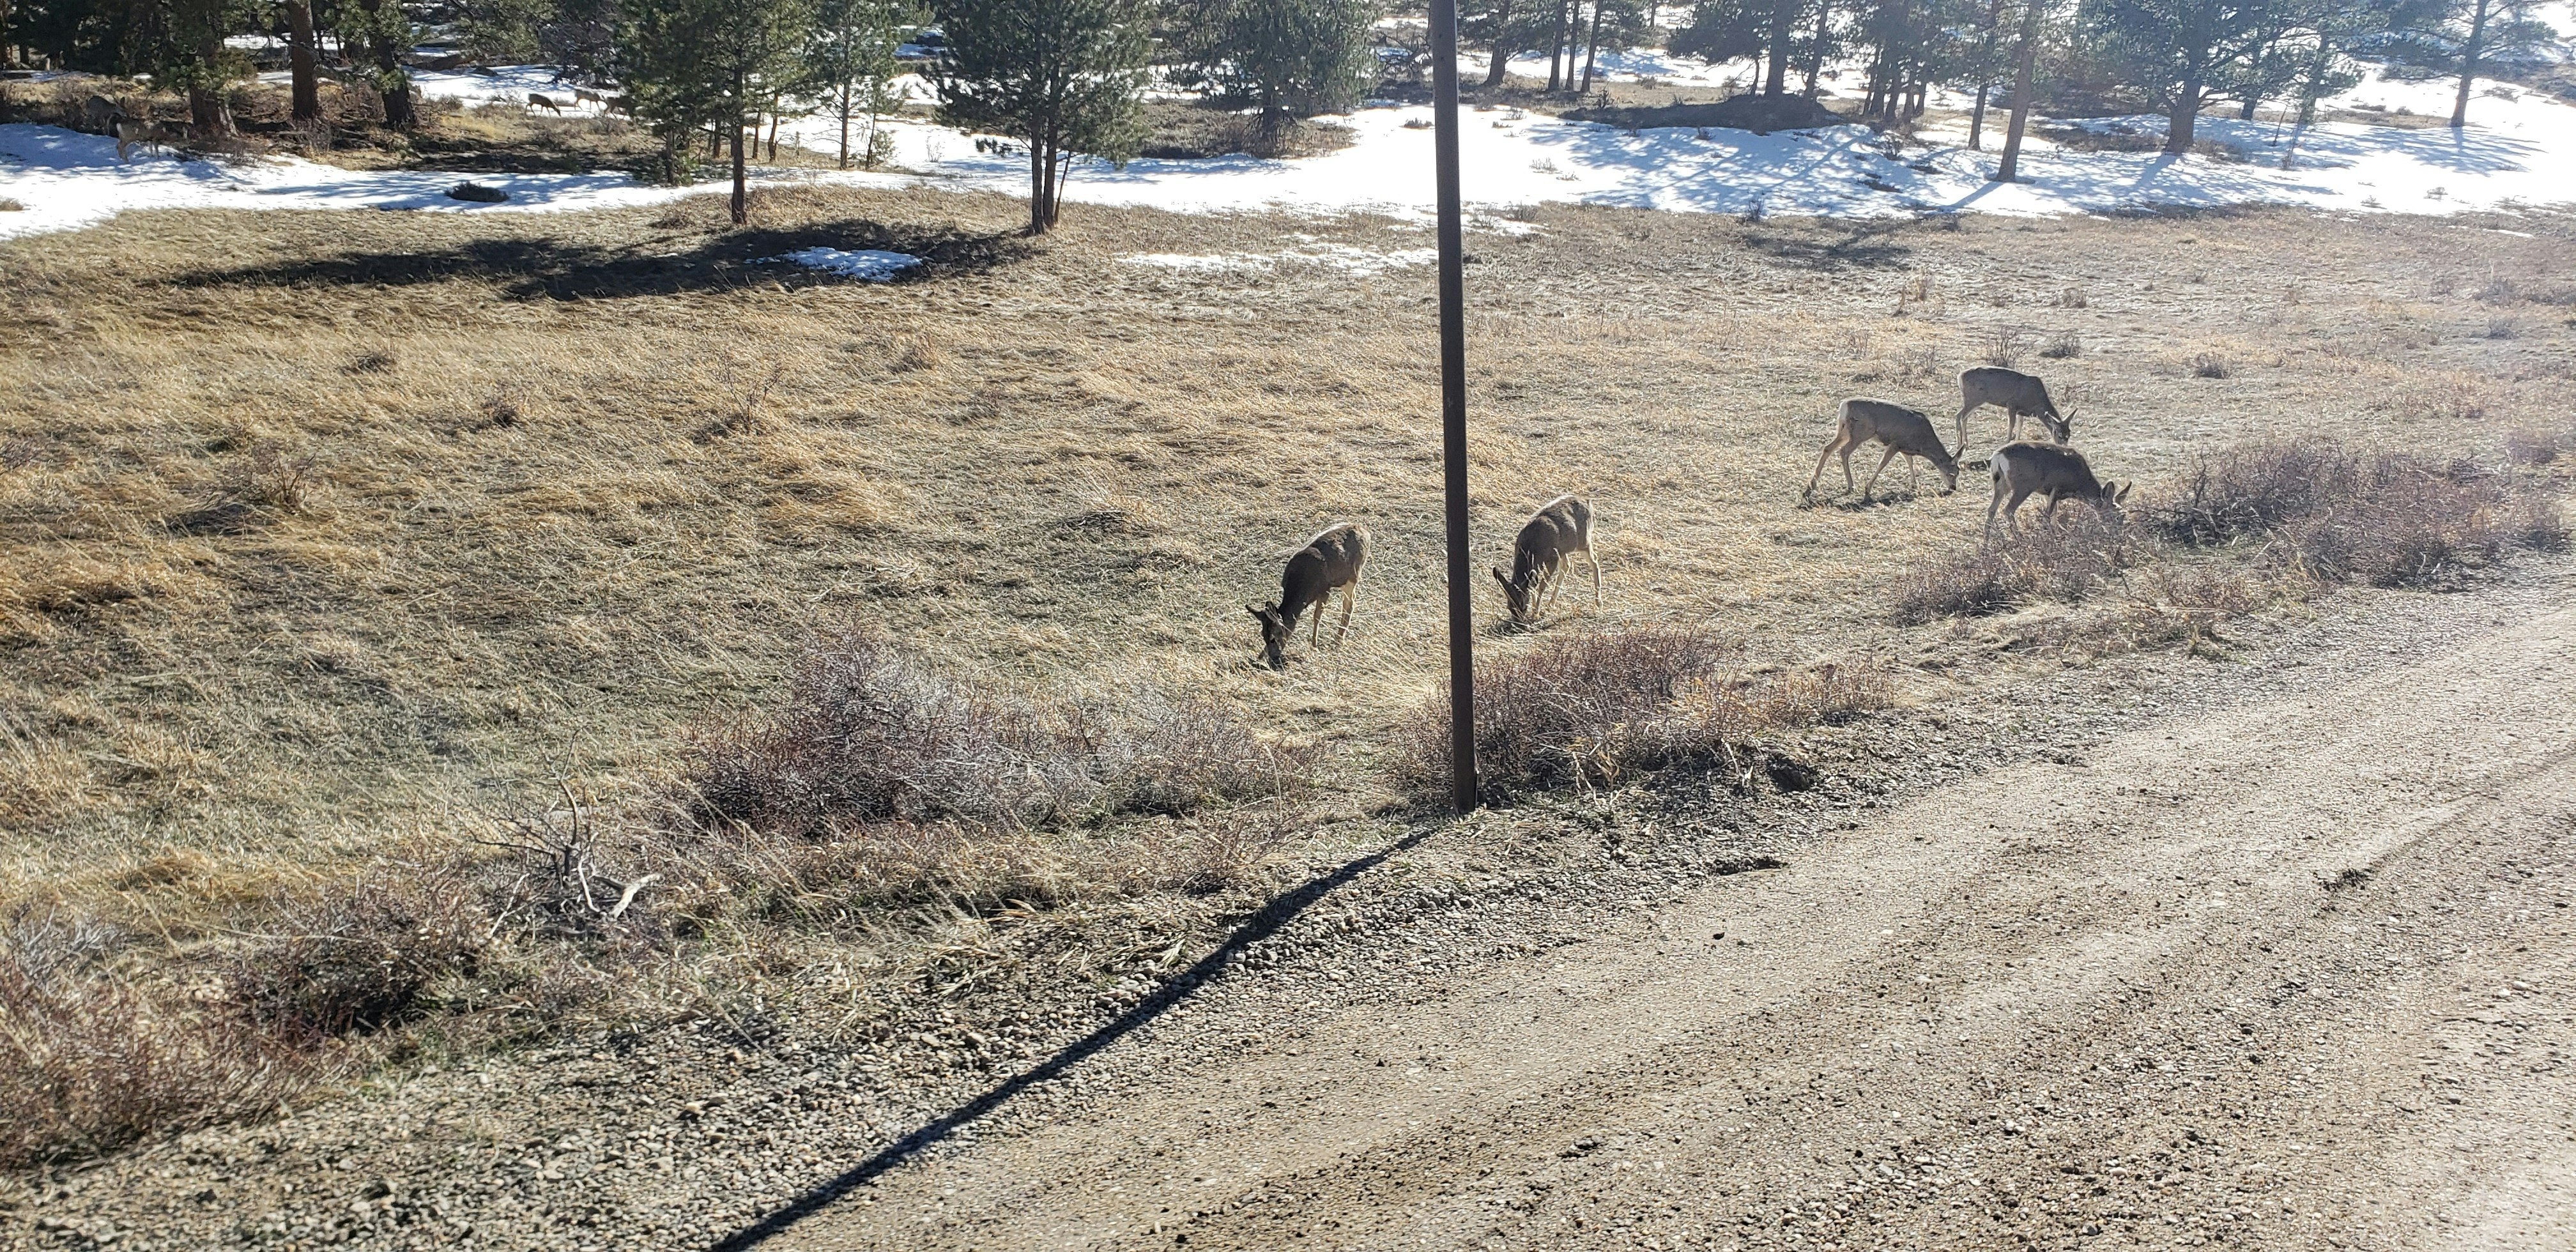 Wildlife are a common site in and around RMNP